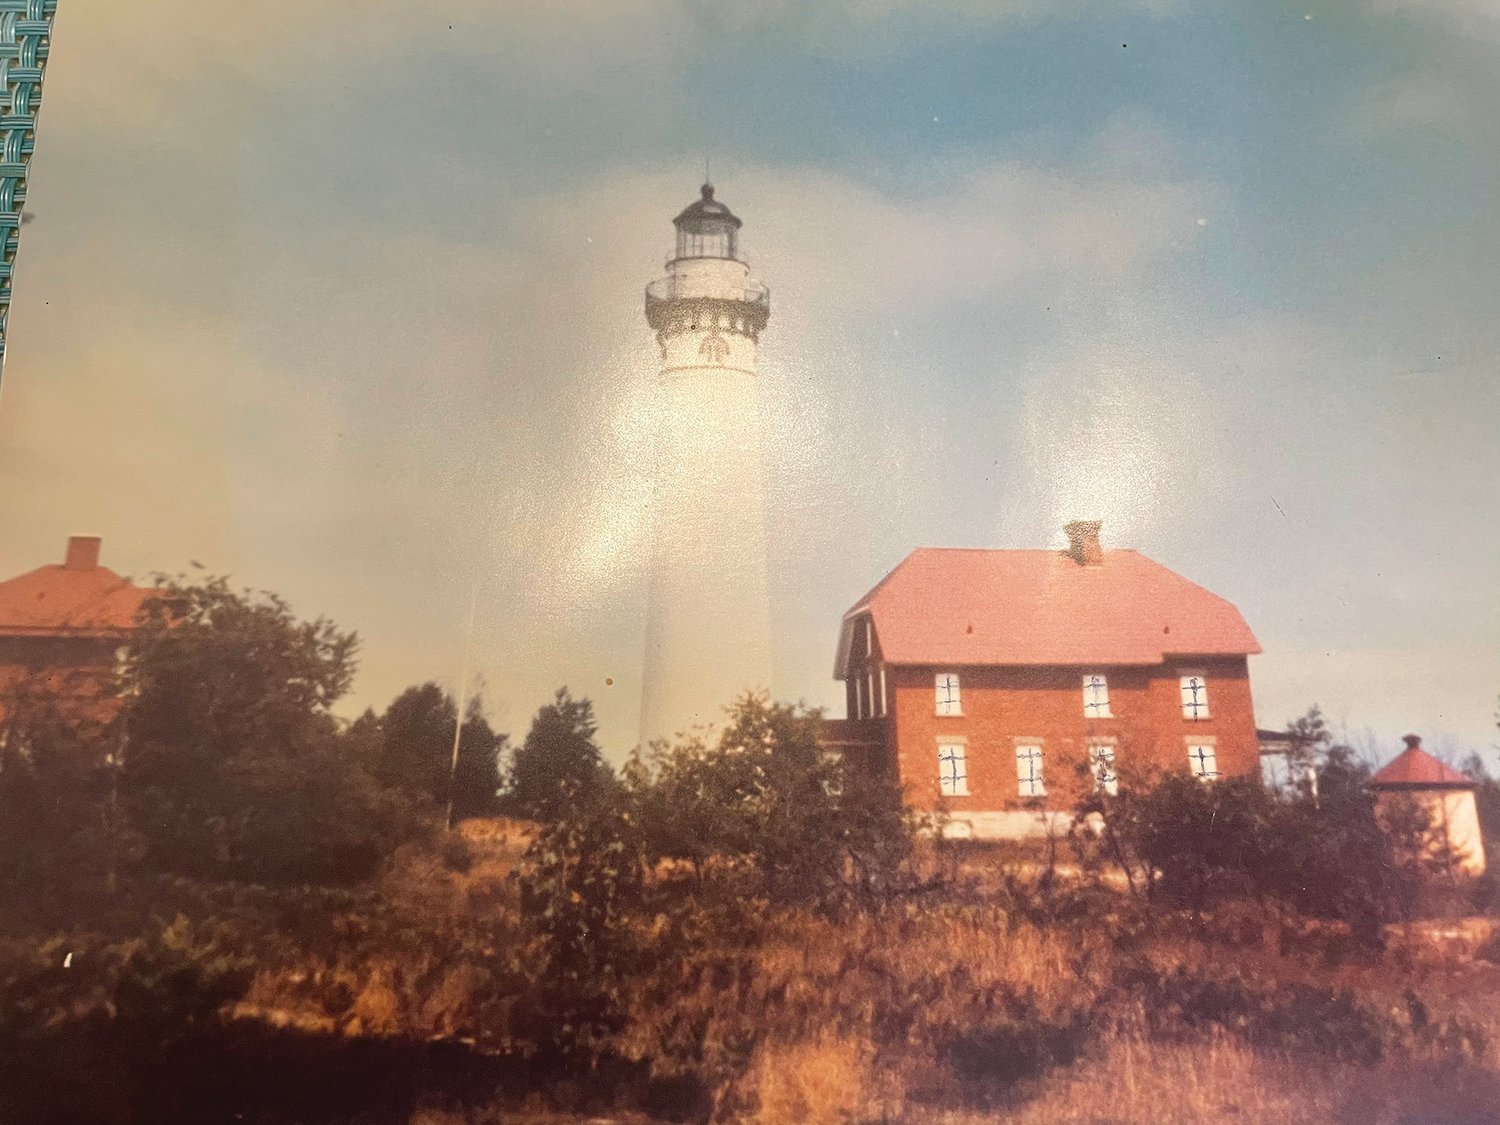 This is the lighthouse where Robert Stefanko lived some of the time he was in the Navy.